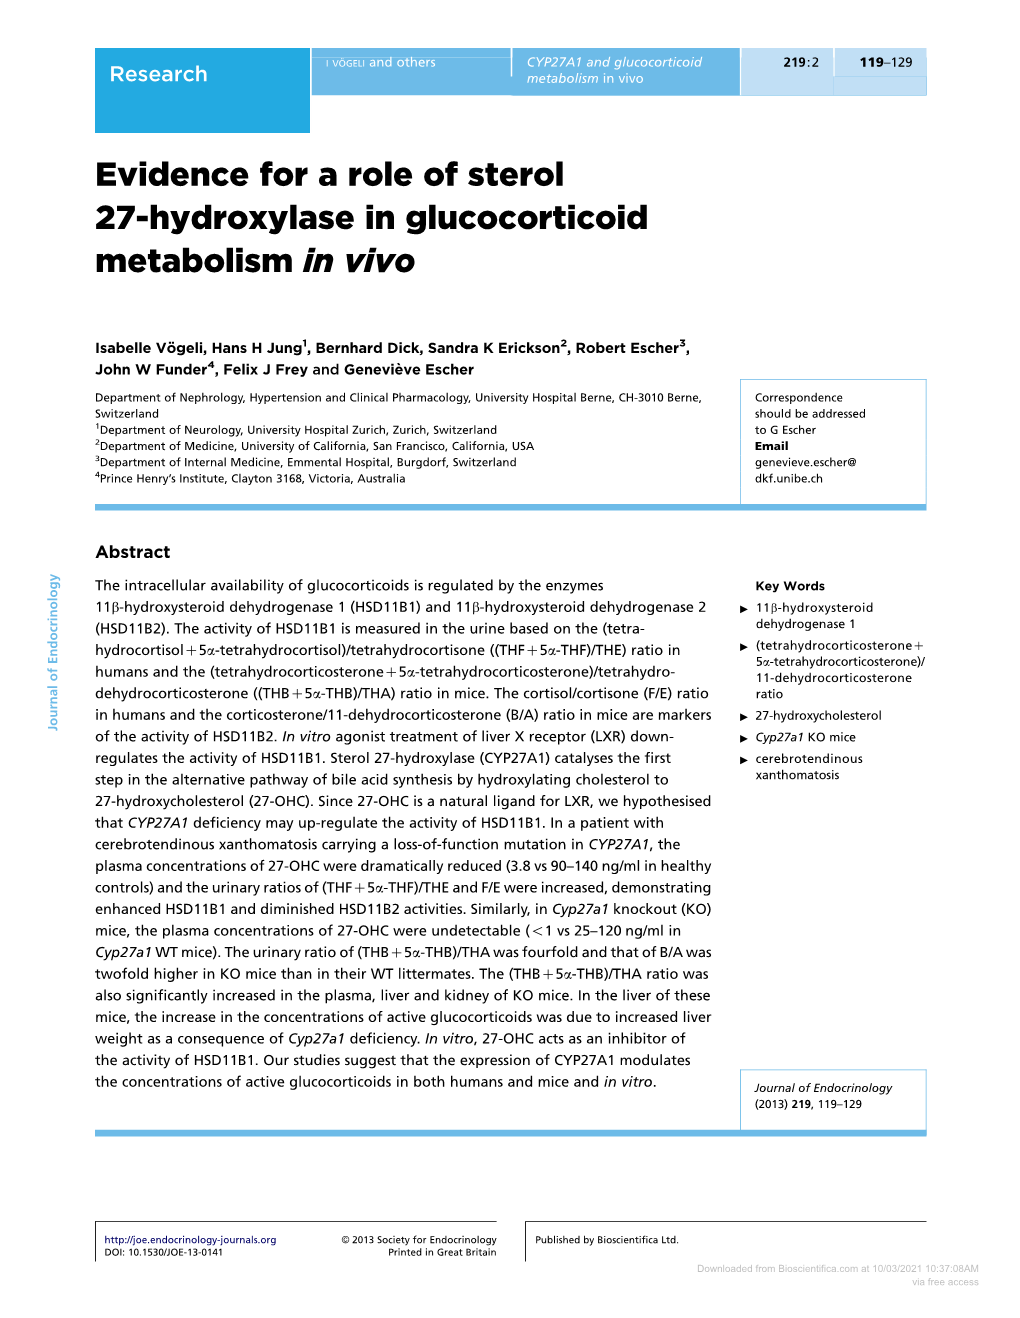 Evidence for a Role of Sterol 27-Hydroxylase in Glucocorticoid Metabolism in Vivo